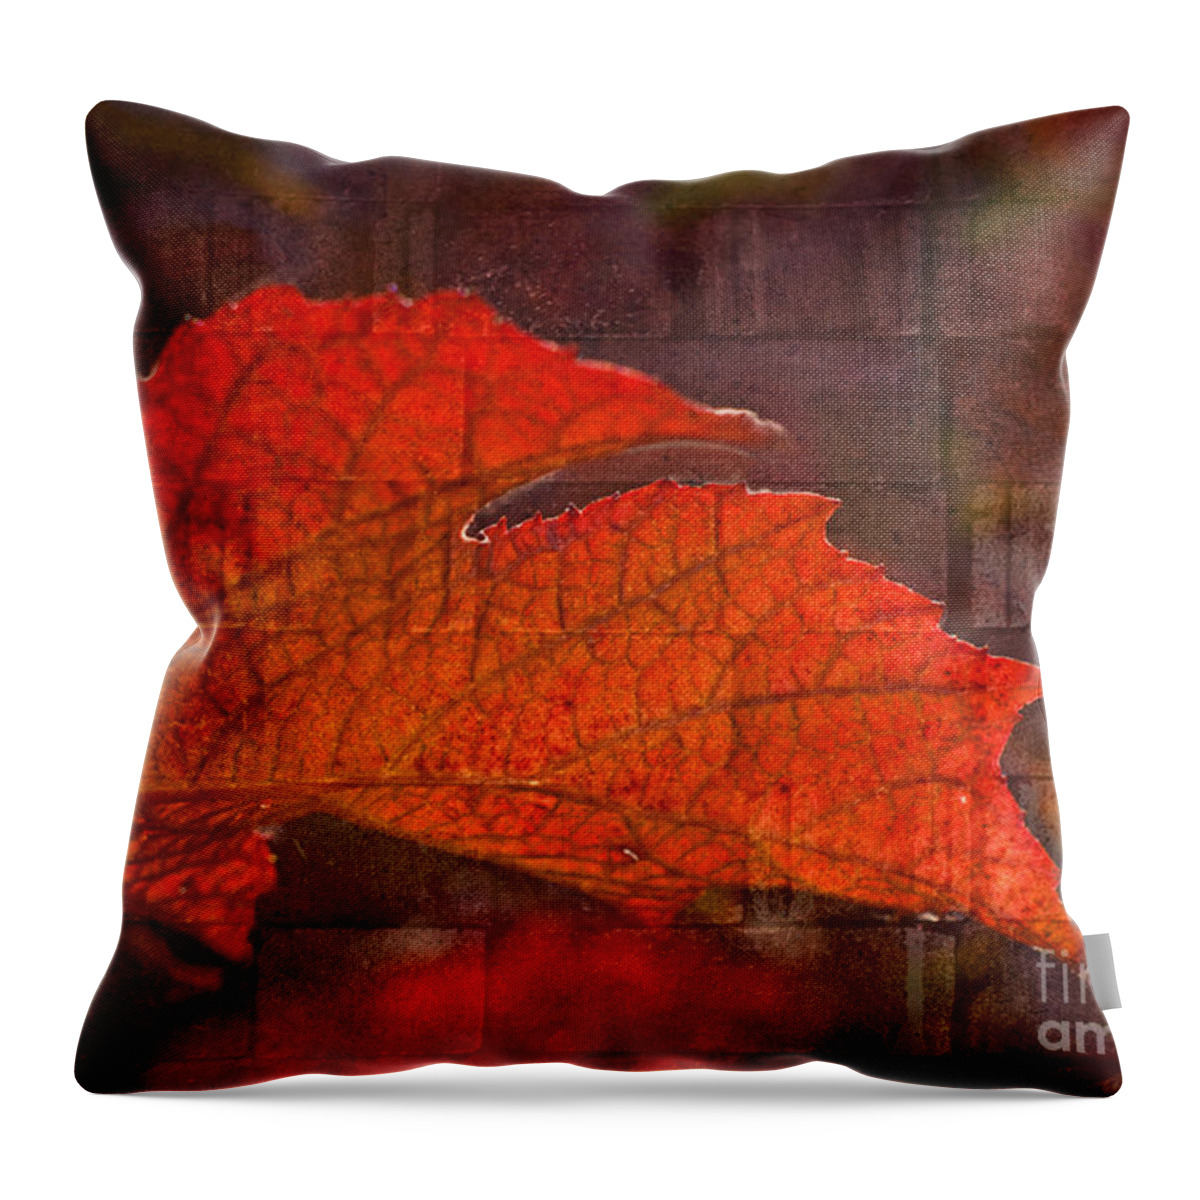 Leaf Throw Pillow featuring the photograph Fiery Wall by Valerie Fuqua